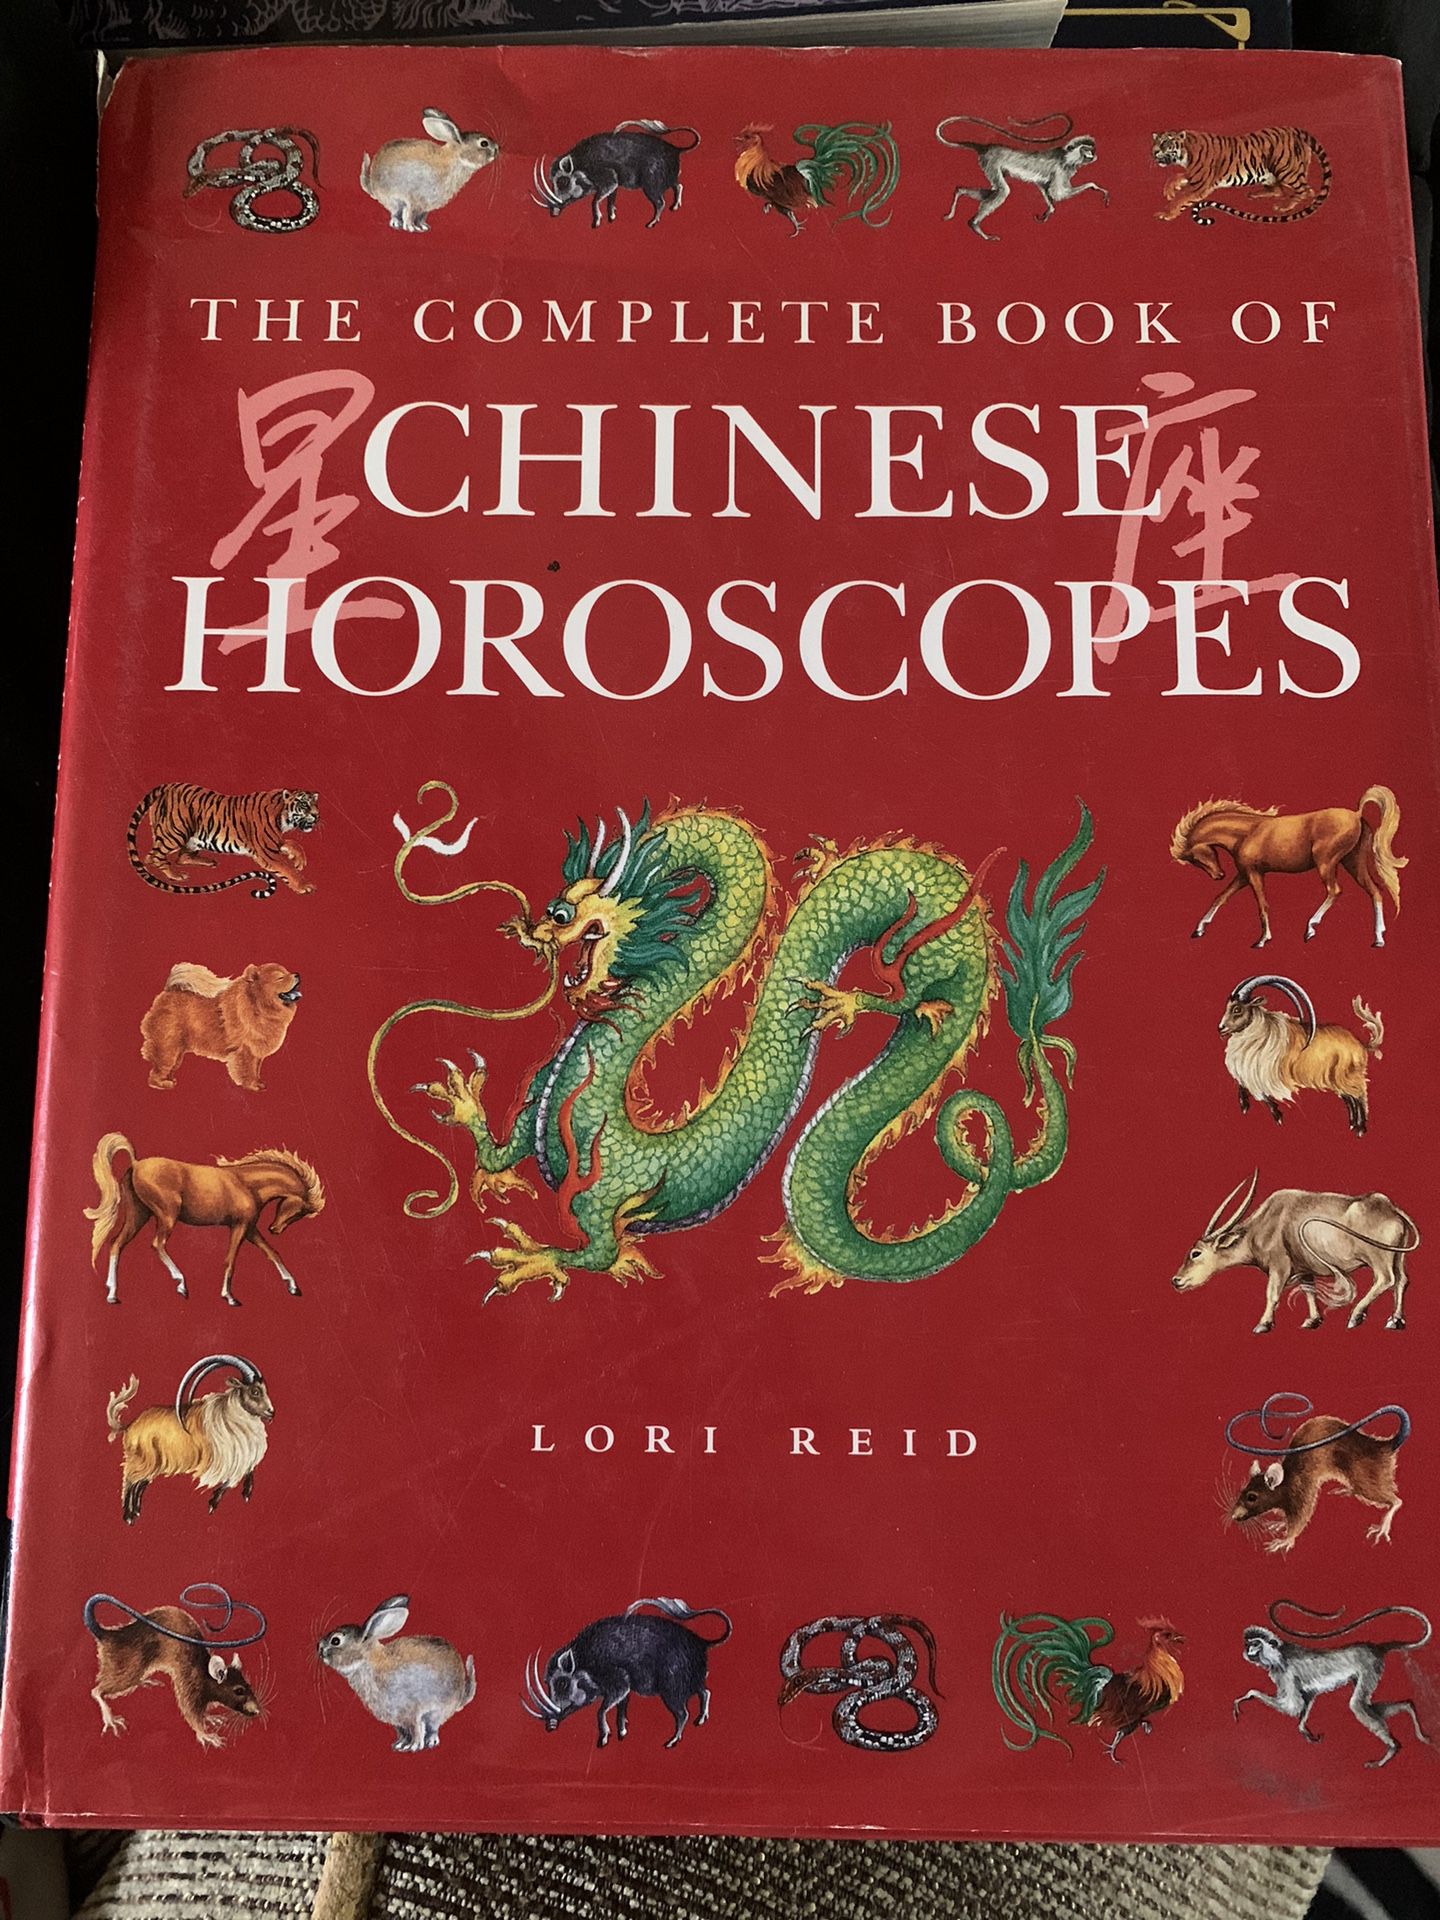 The Complete Book Of Chinese Horoscopes